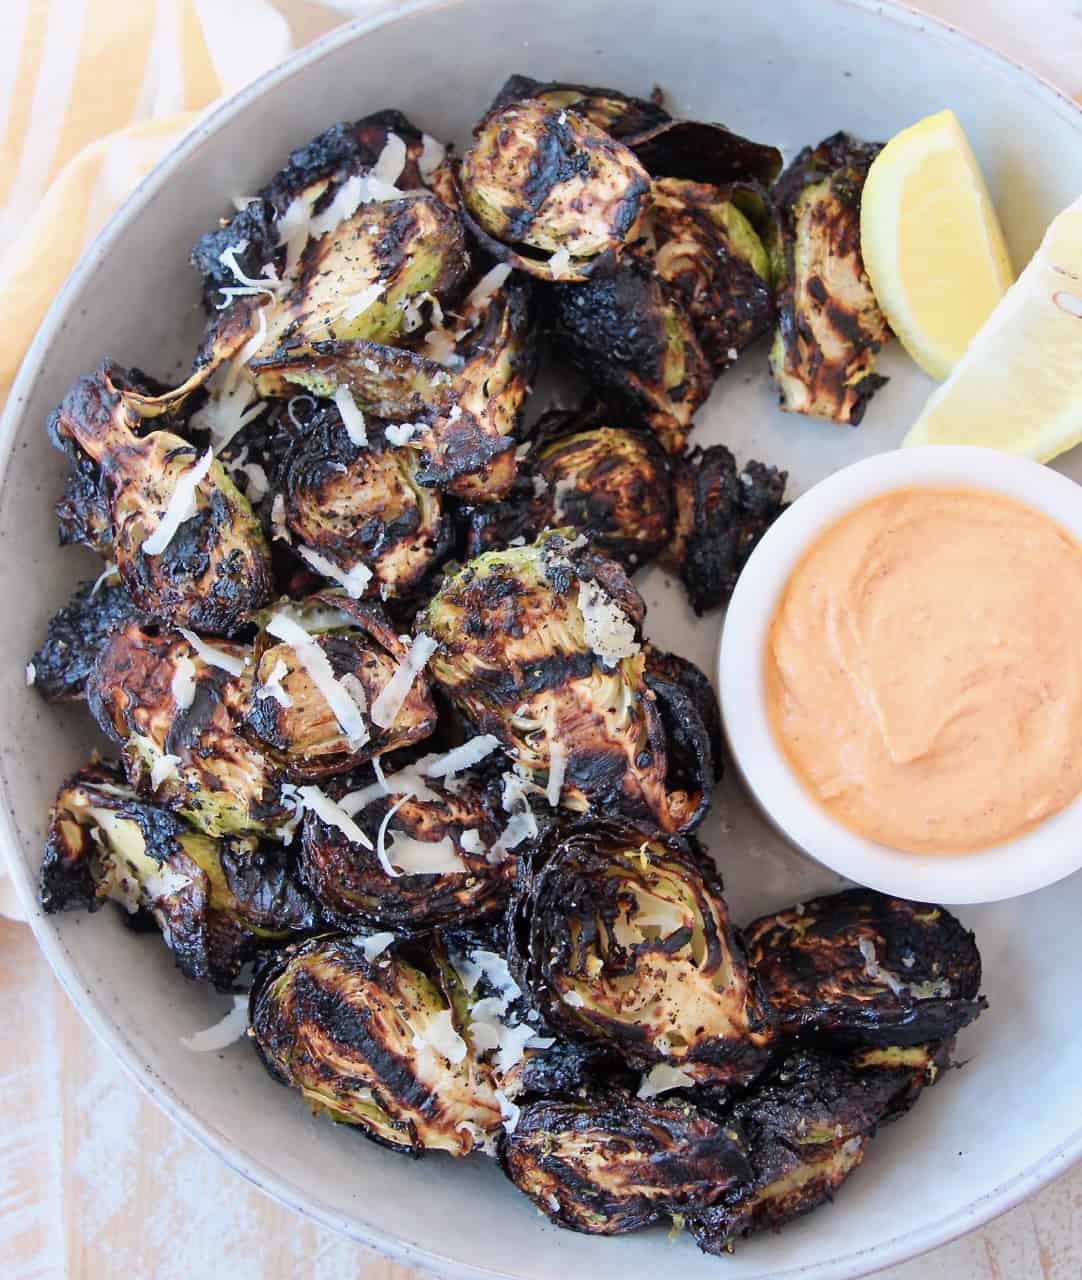 grilled brussels sprouts in bowl with harissa tahini dipping sauce on the side